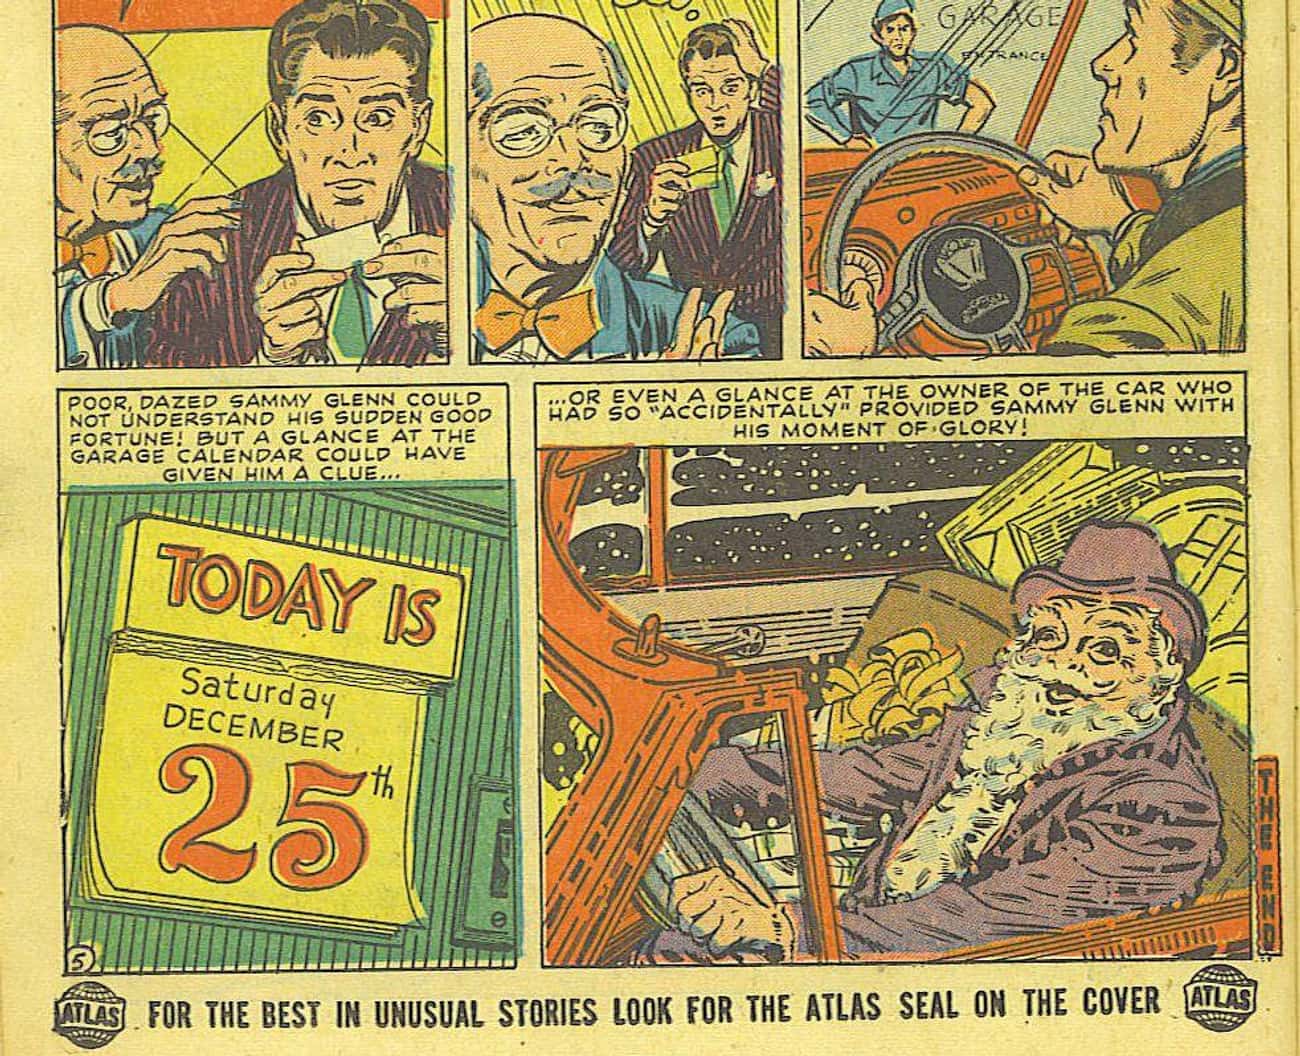 Santa Claus Has Been A Part Of Marvel Comics Canon For Longer Than Spider-Man Or The Avengers 